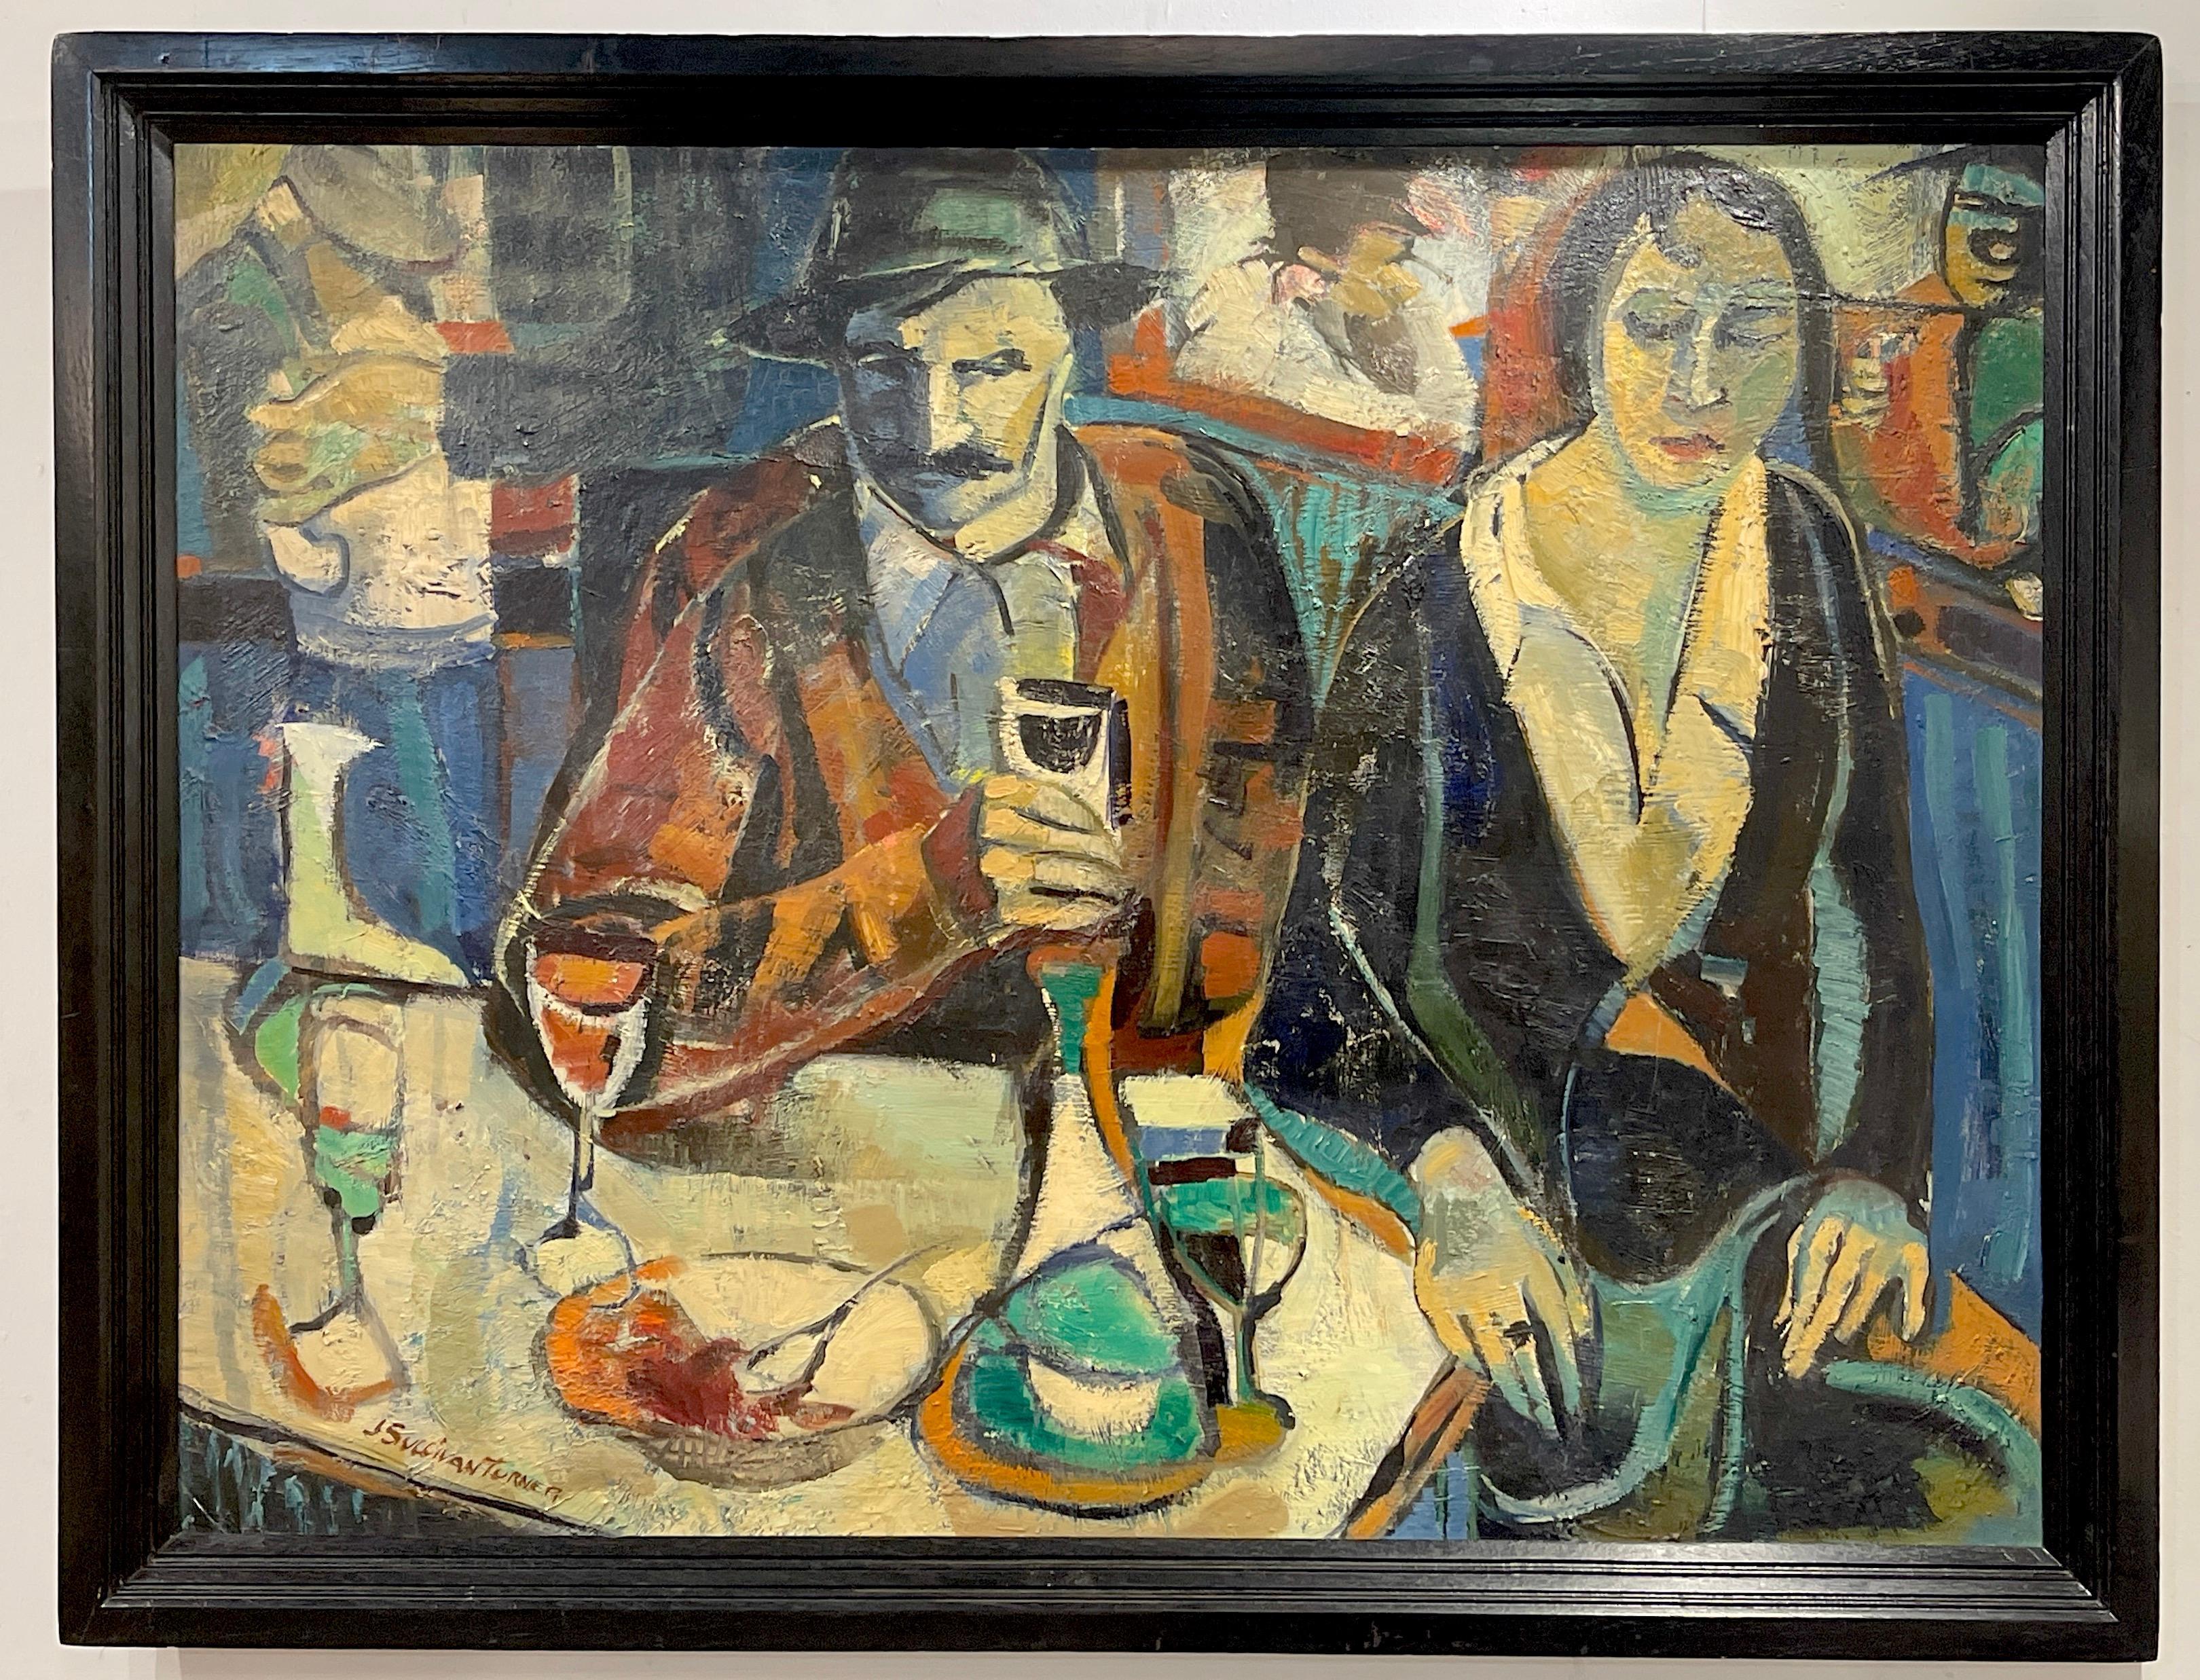 'The Banquette' by Janet Sullivan Turner
Janet Sullivan Turner (American, b 1935) 
A large intriguing cubist/modern painting of couple seated in a busy European cafe. 
Oil on board
Signed lower left 